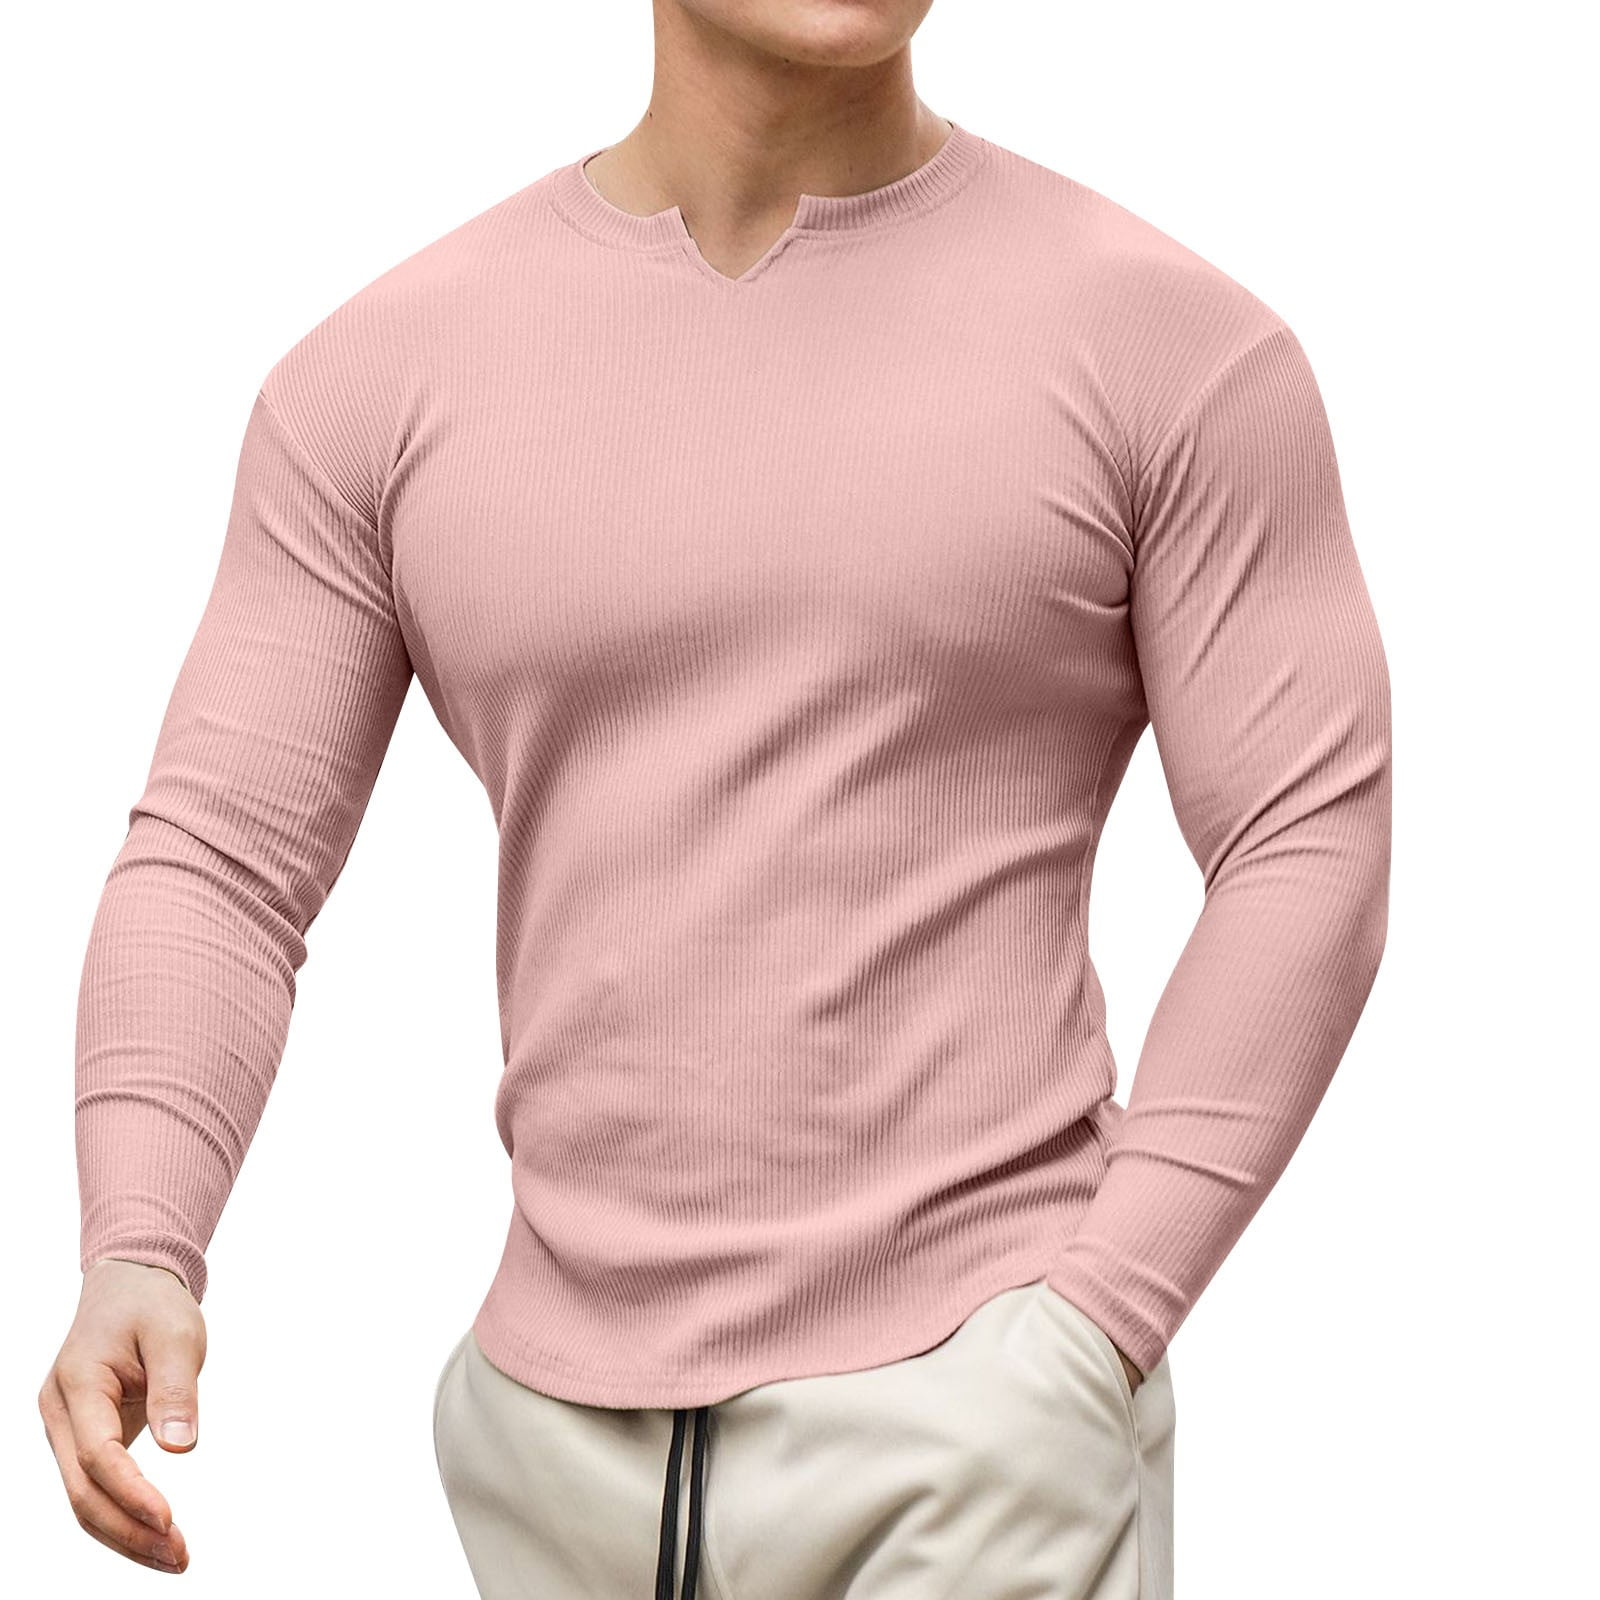 GWAABD Zipper Shirts Men Male Spring and Summer V Neck Tops with Solid  Color Long Sleeve Casual Elastic Slim Fit T Shirts 